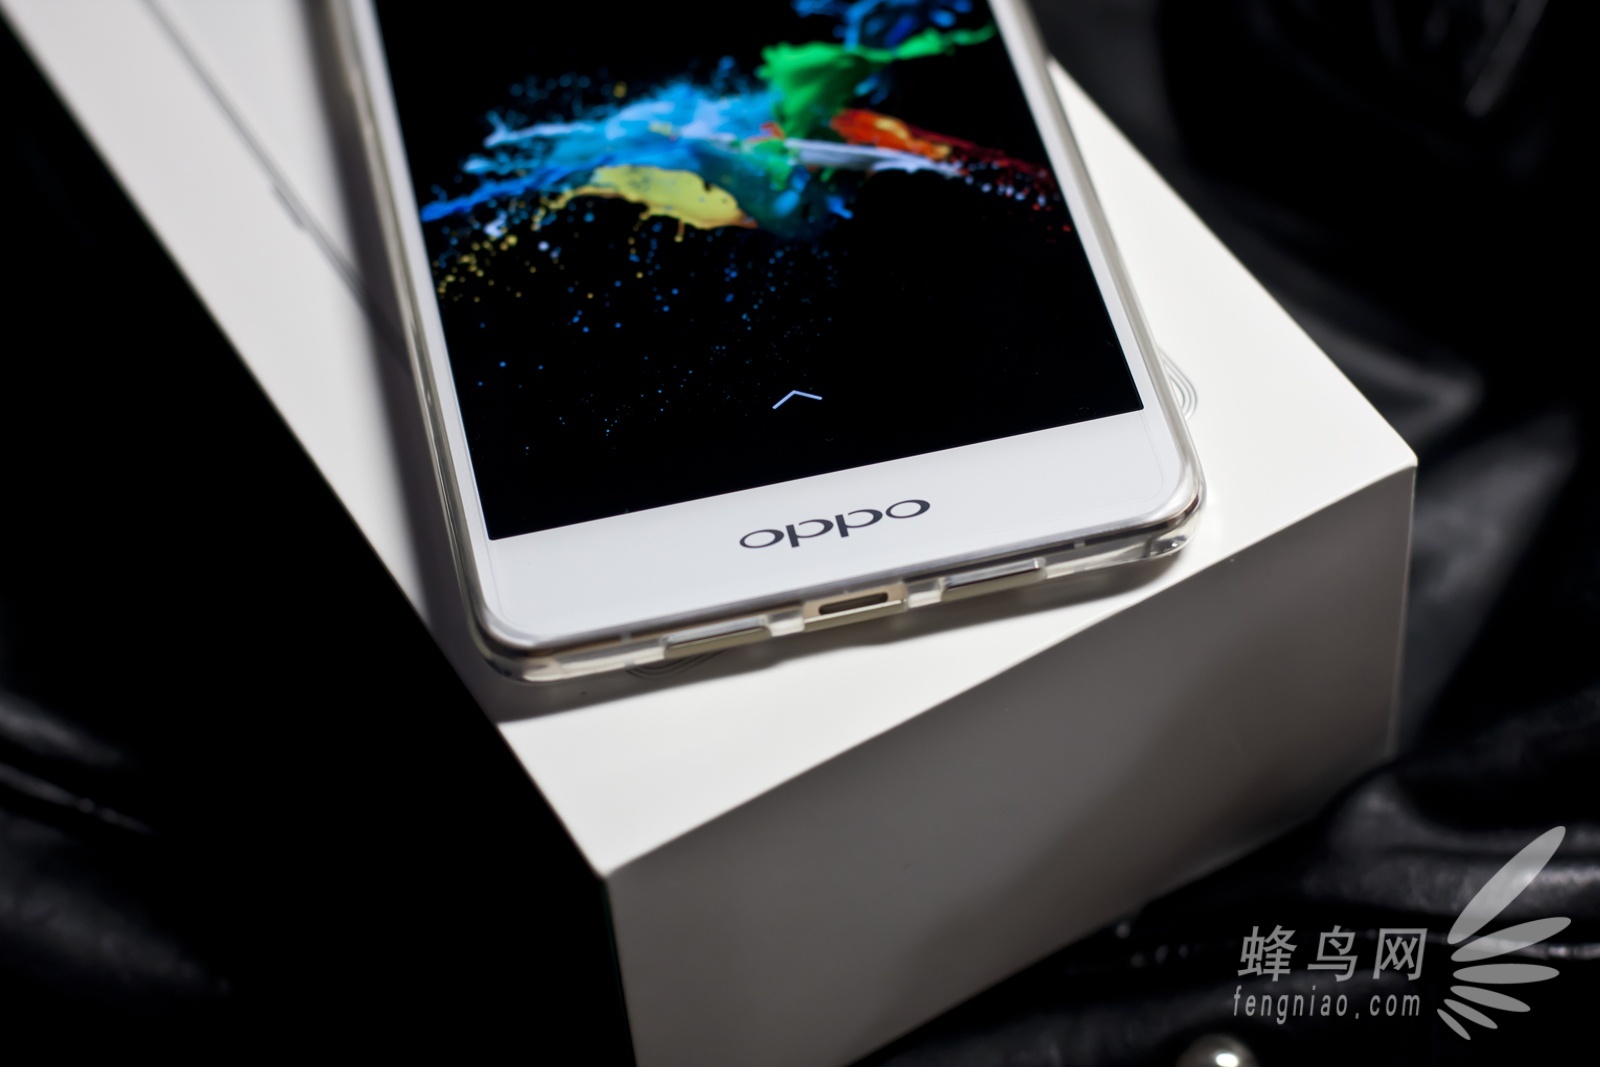 Oppo R7s pictures, official photos